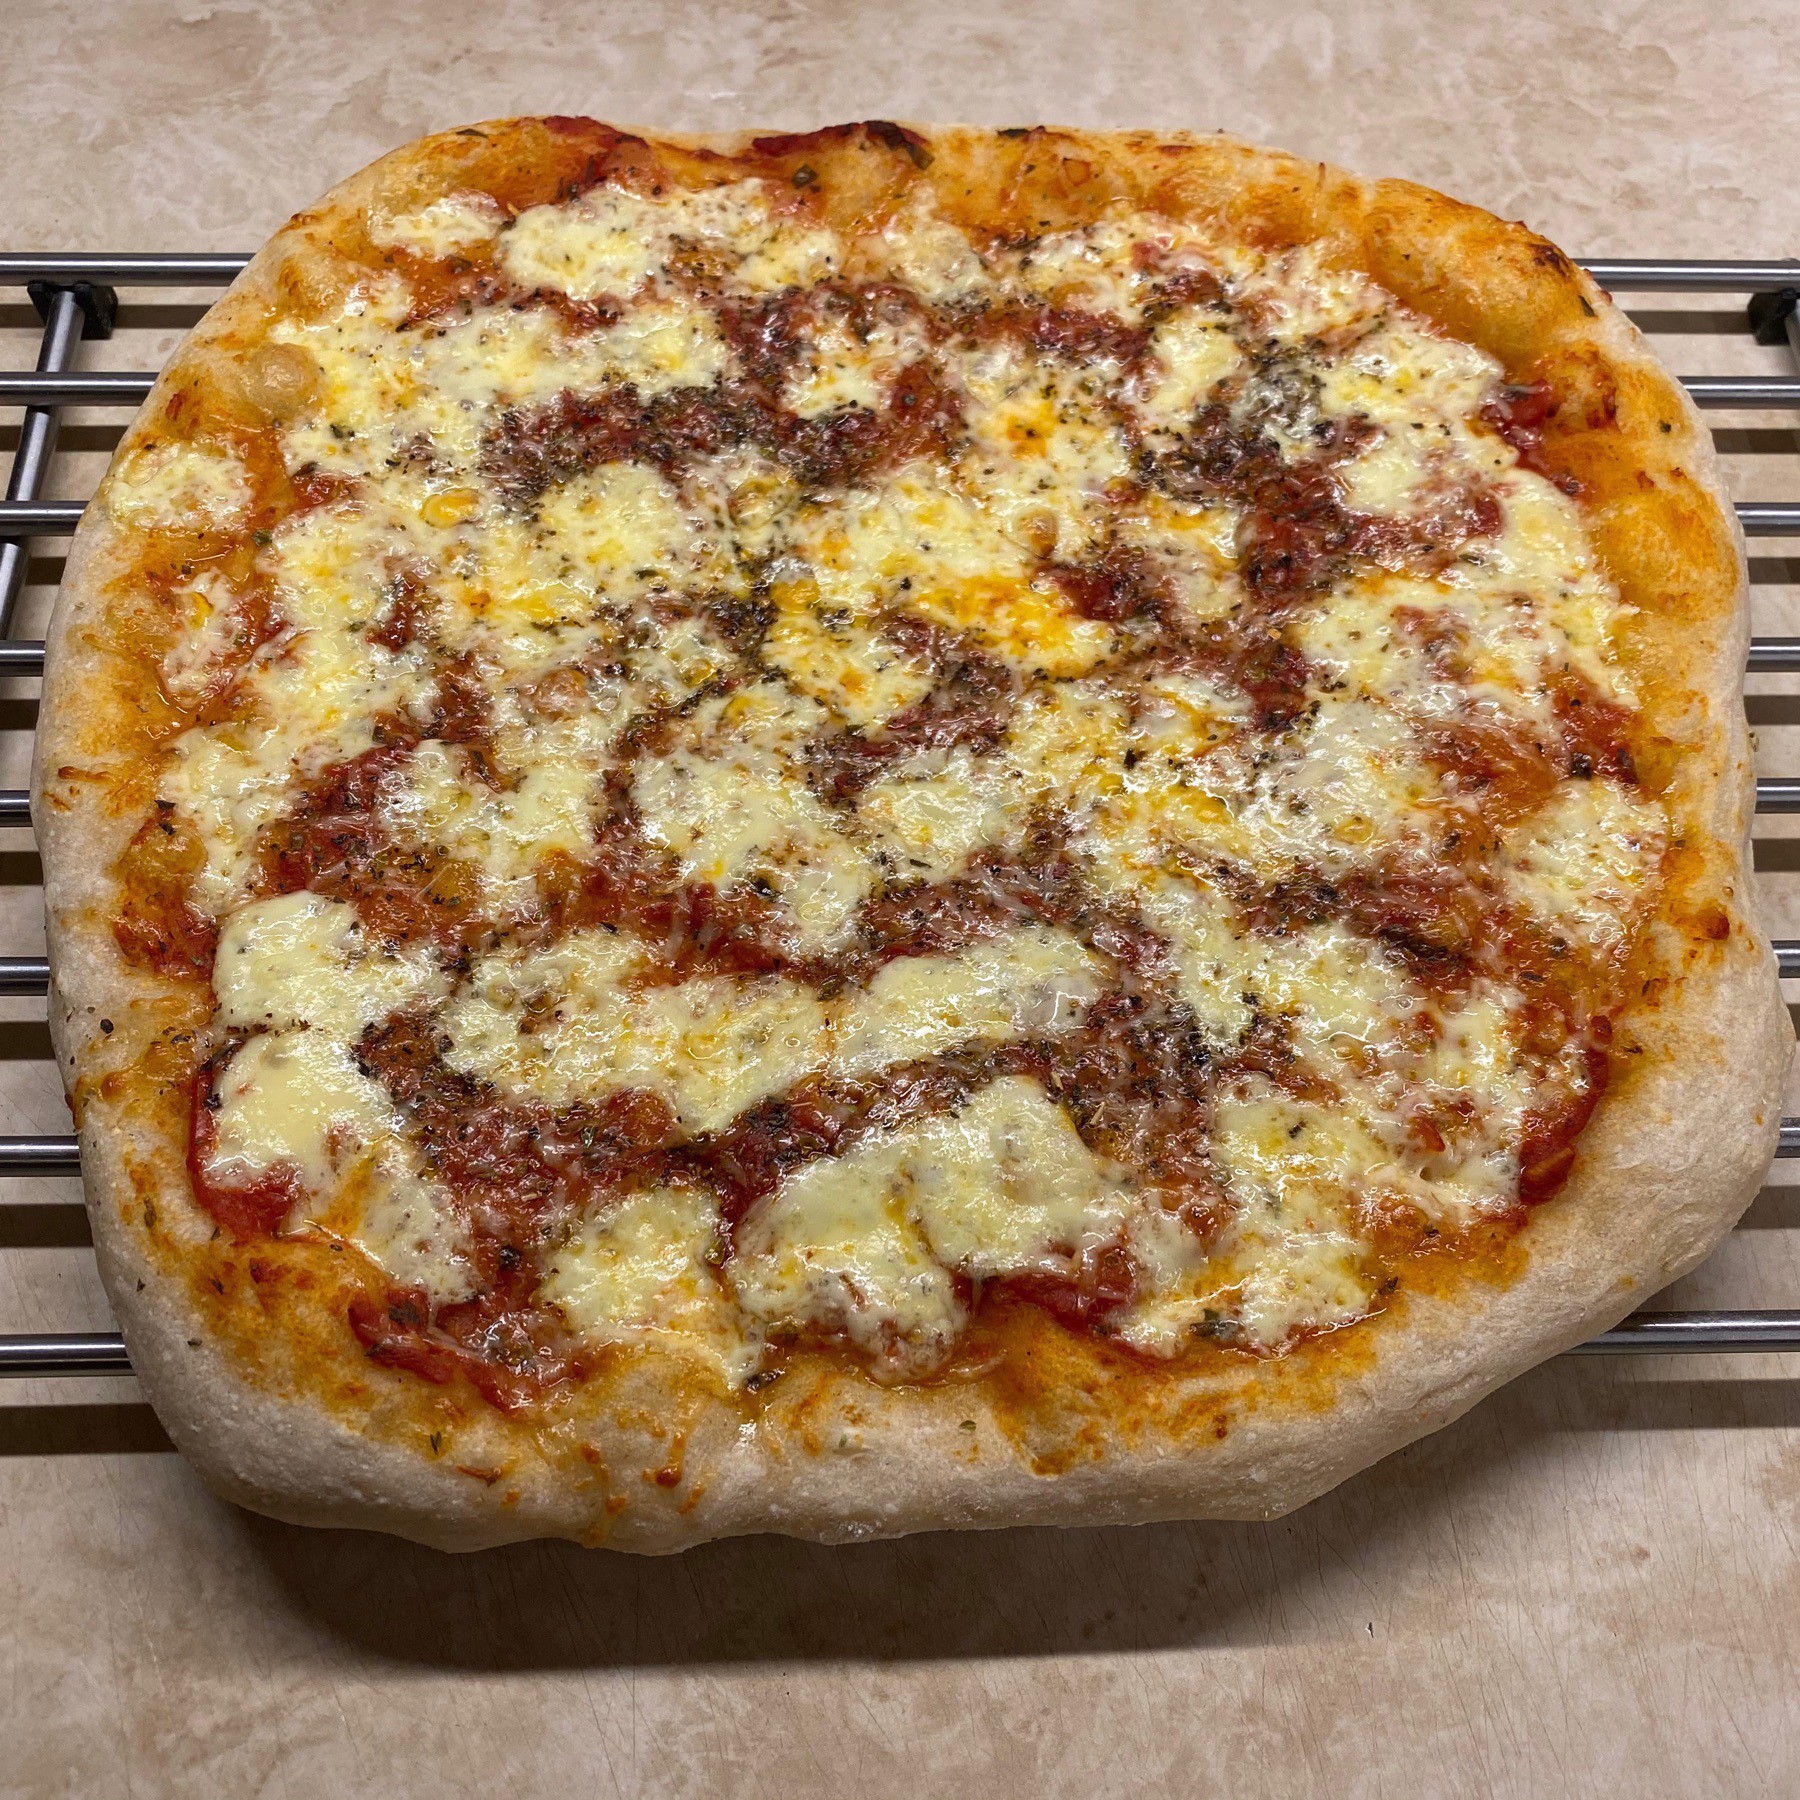 Cheese pizza cooling on rack.